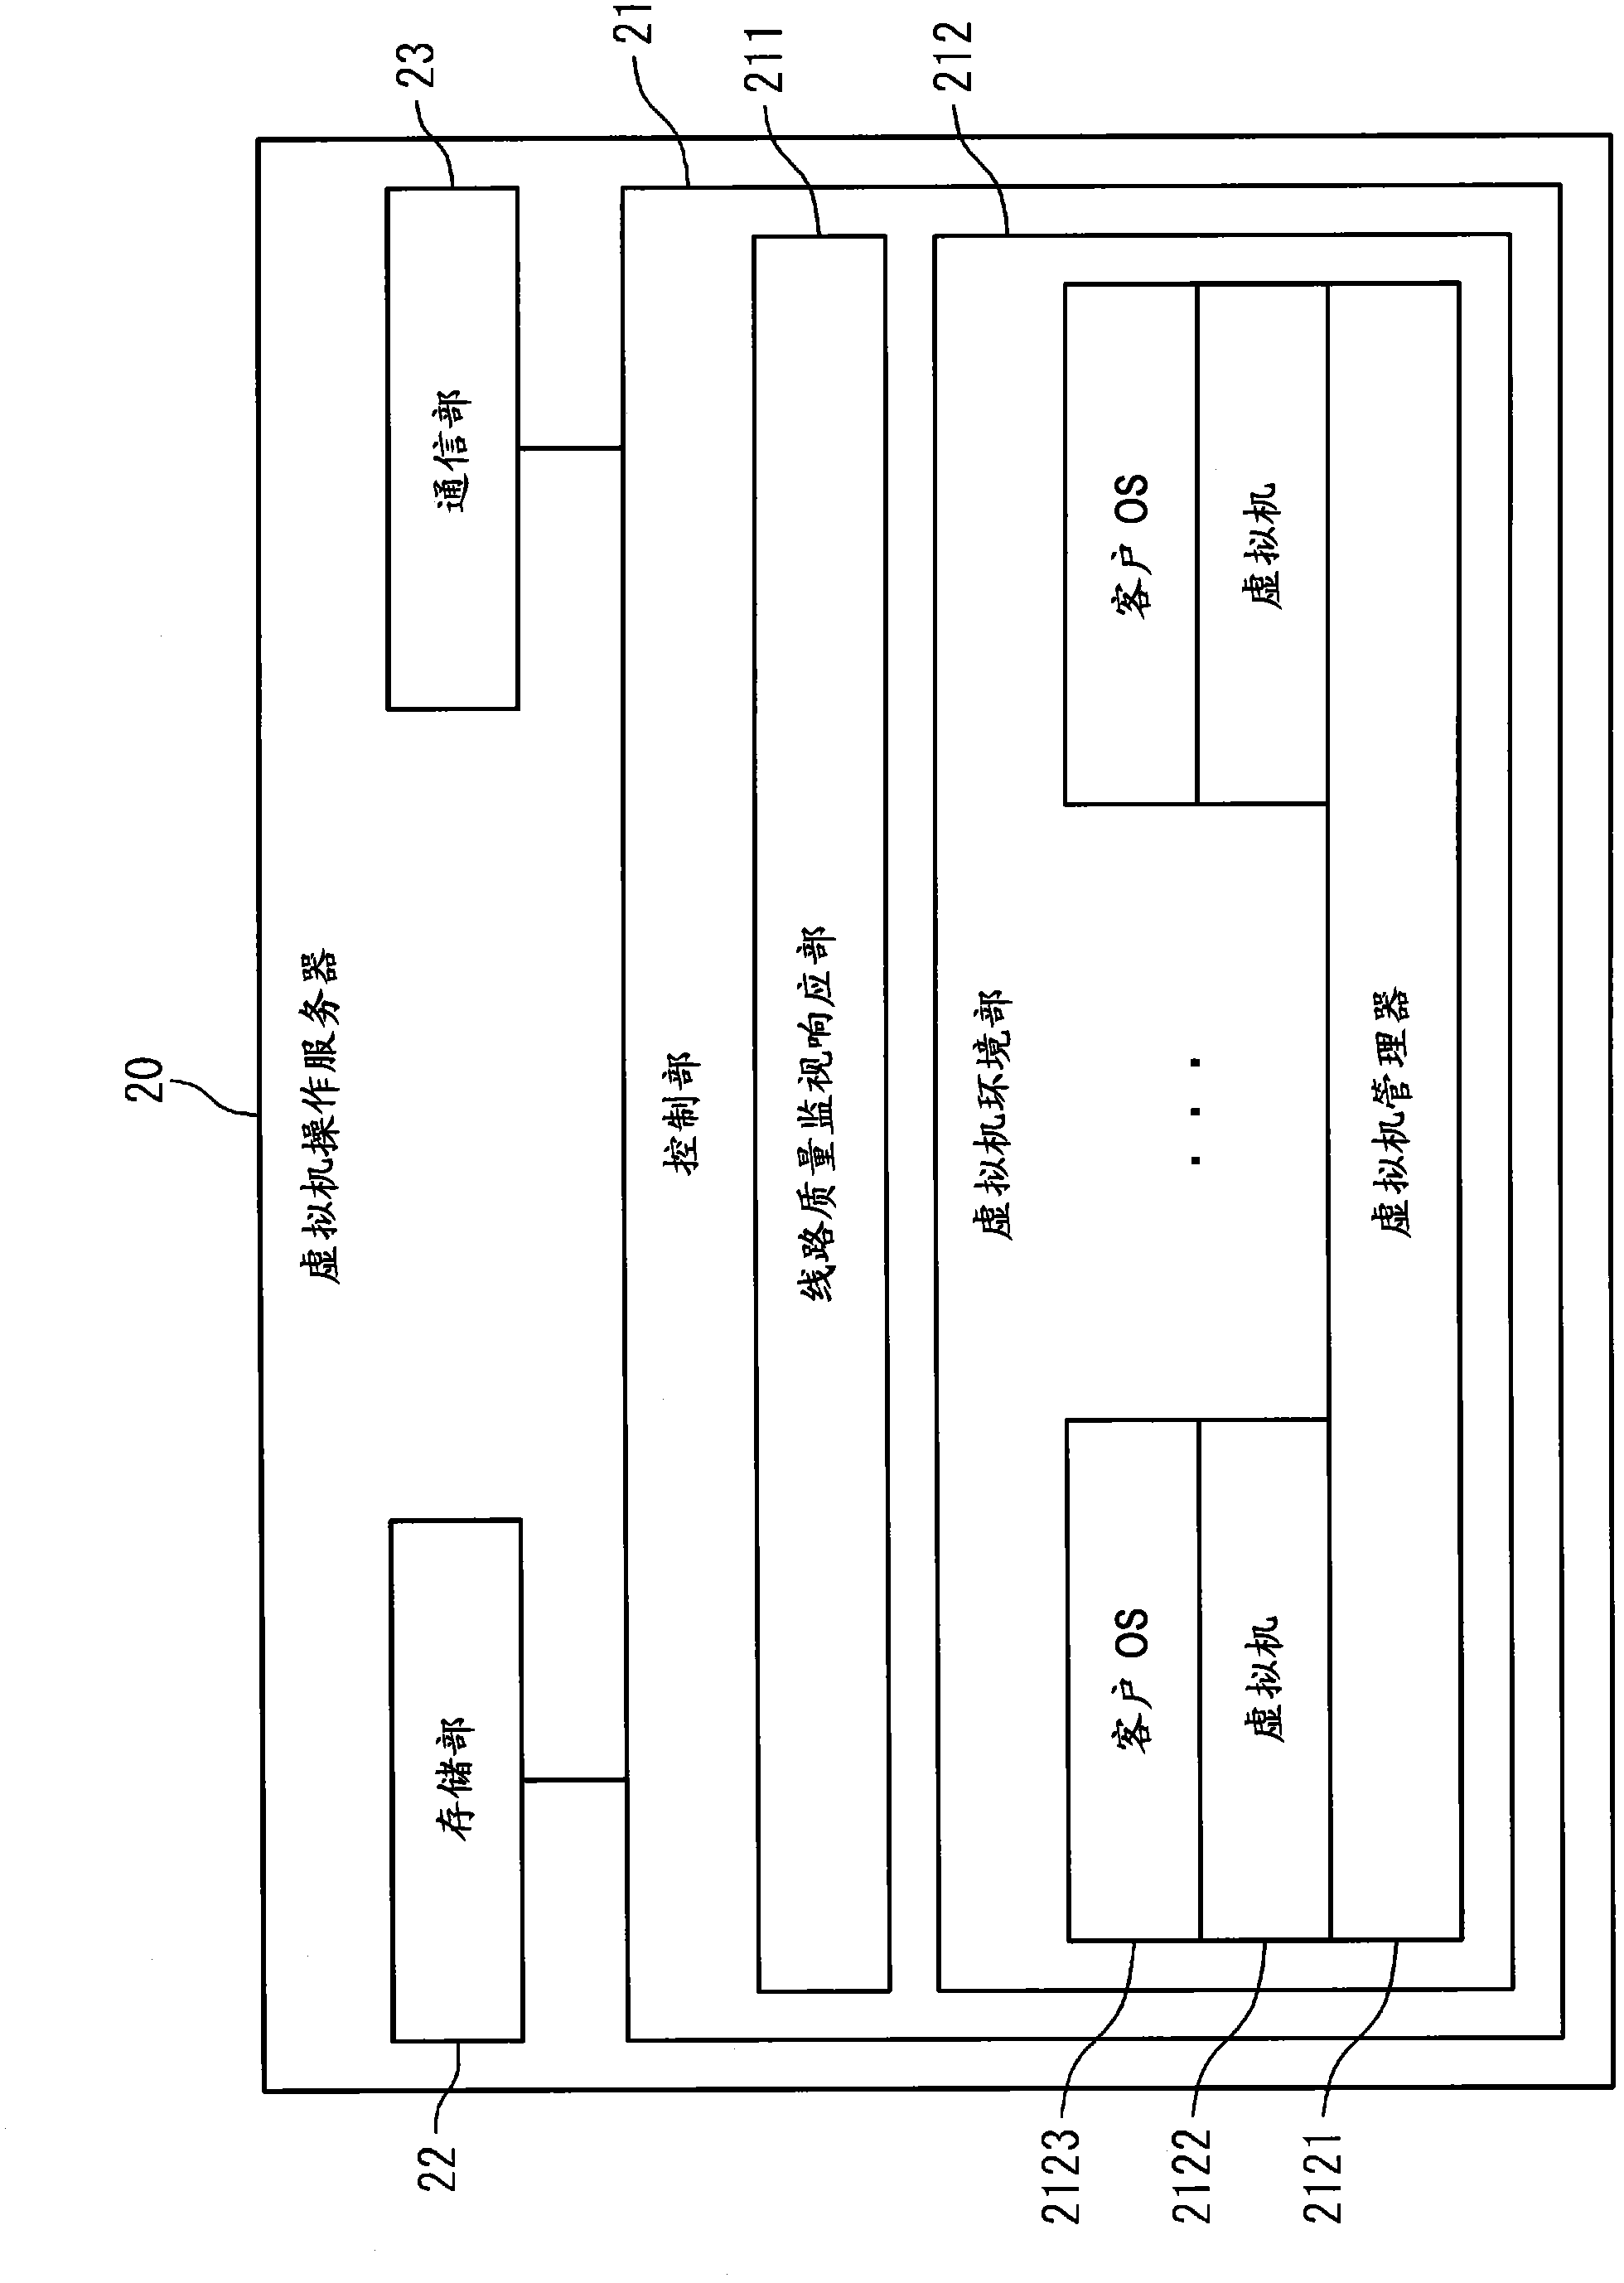 Virtual machine administration system and virtual machine administration method